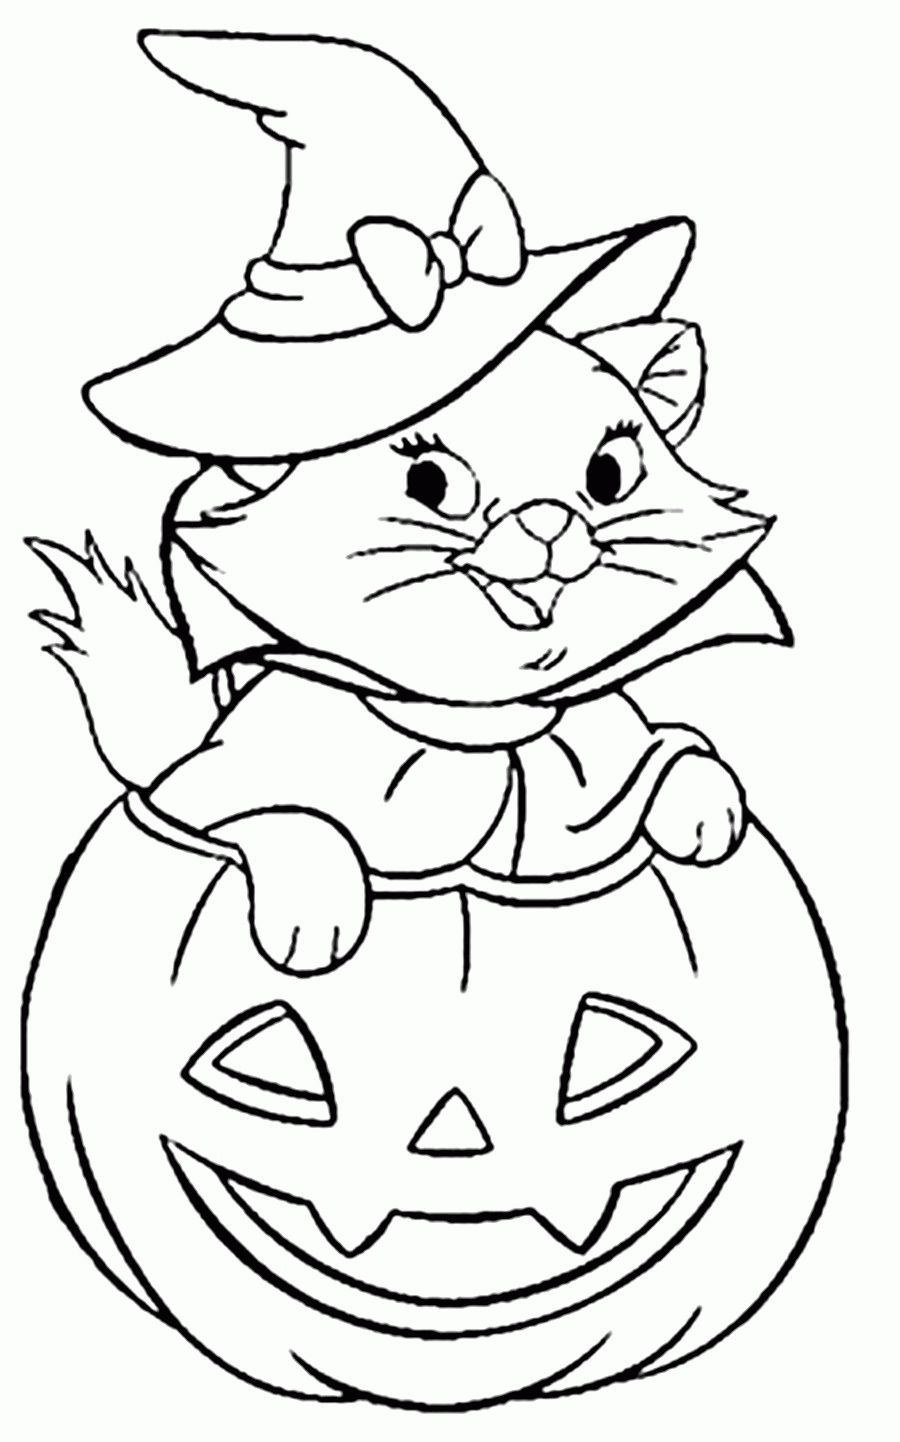 Halloween Cat Coloring Pages Free Printable - Coloring Home